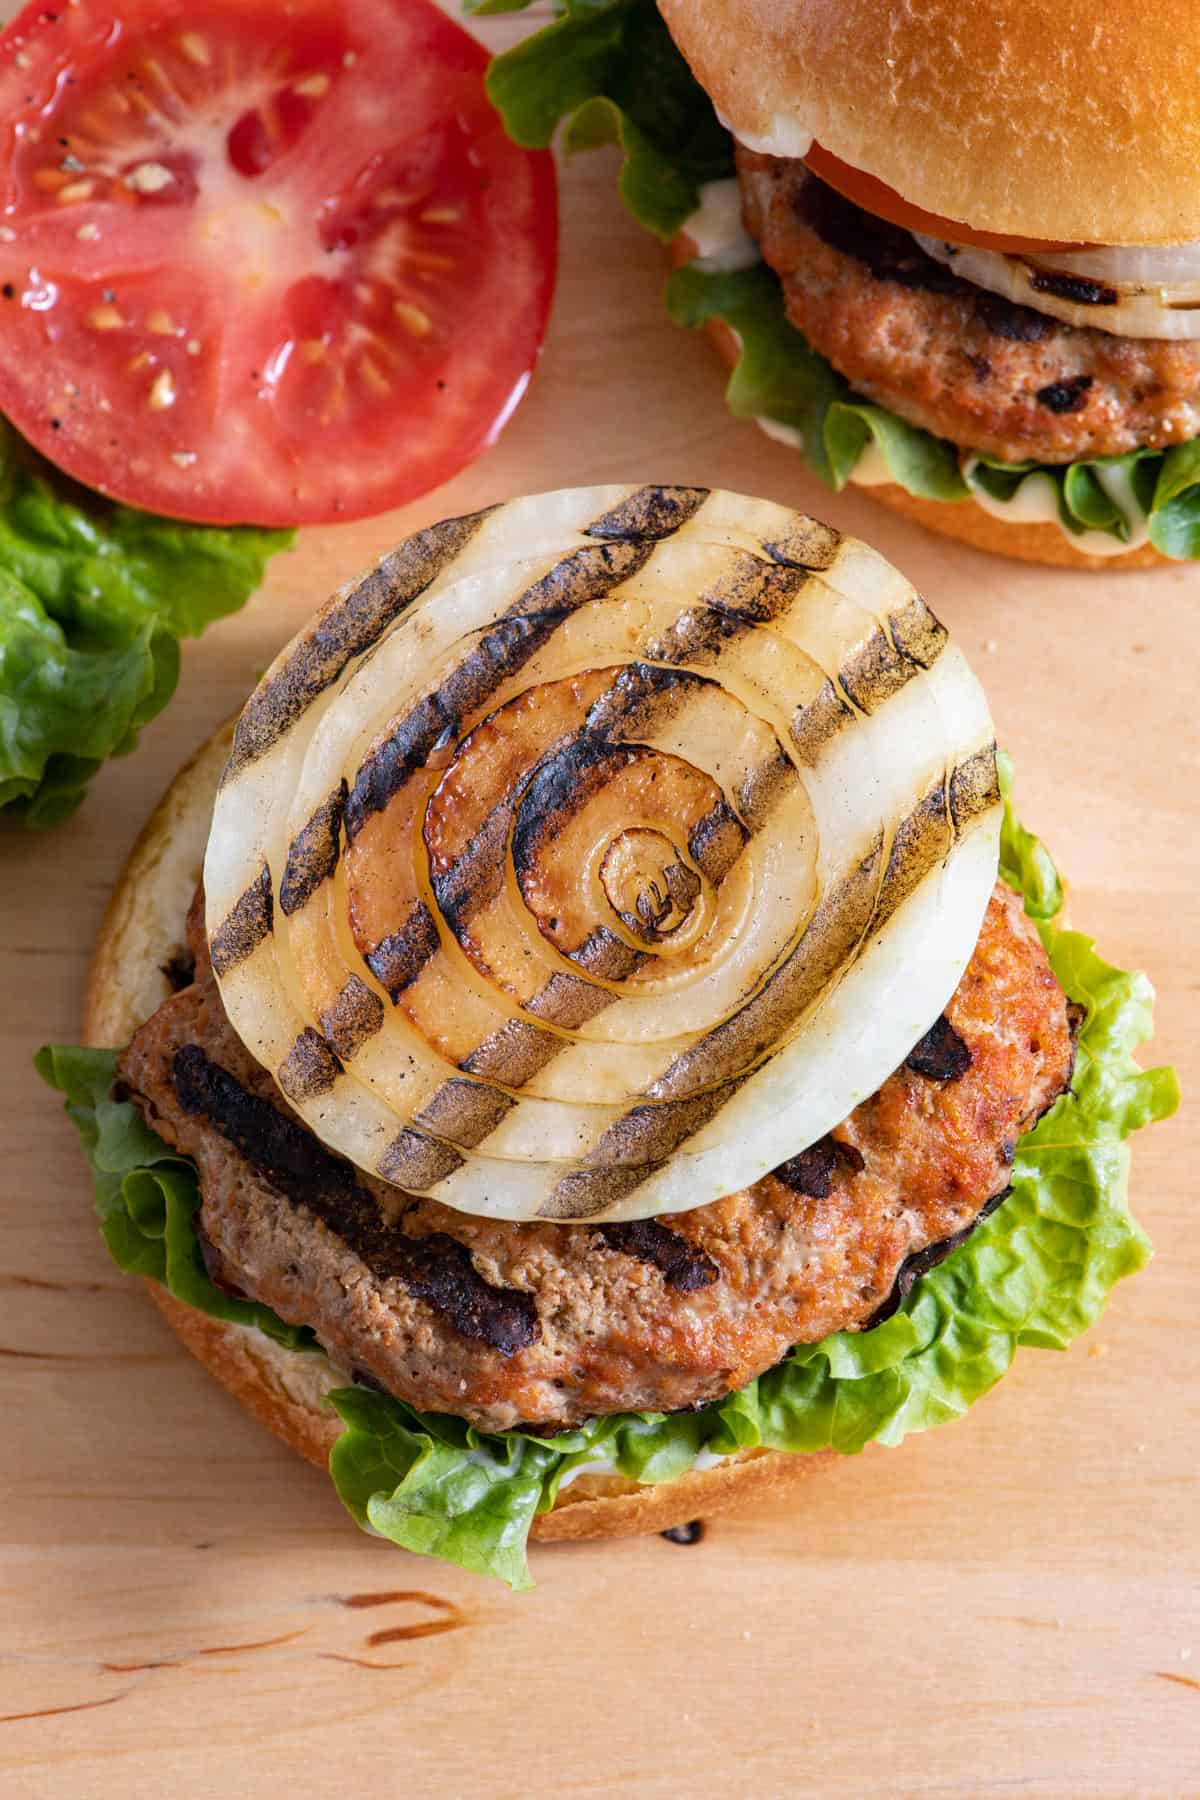 Turkey burger without top bun showing grilled onion ring.